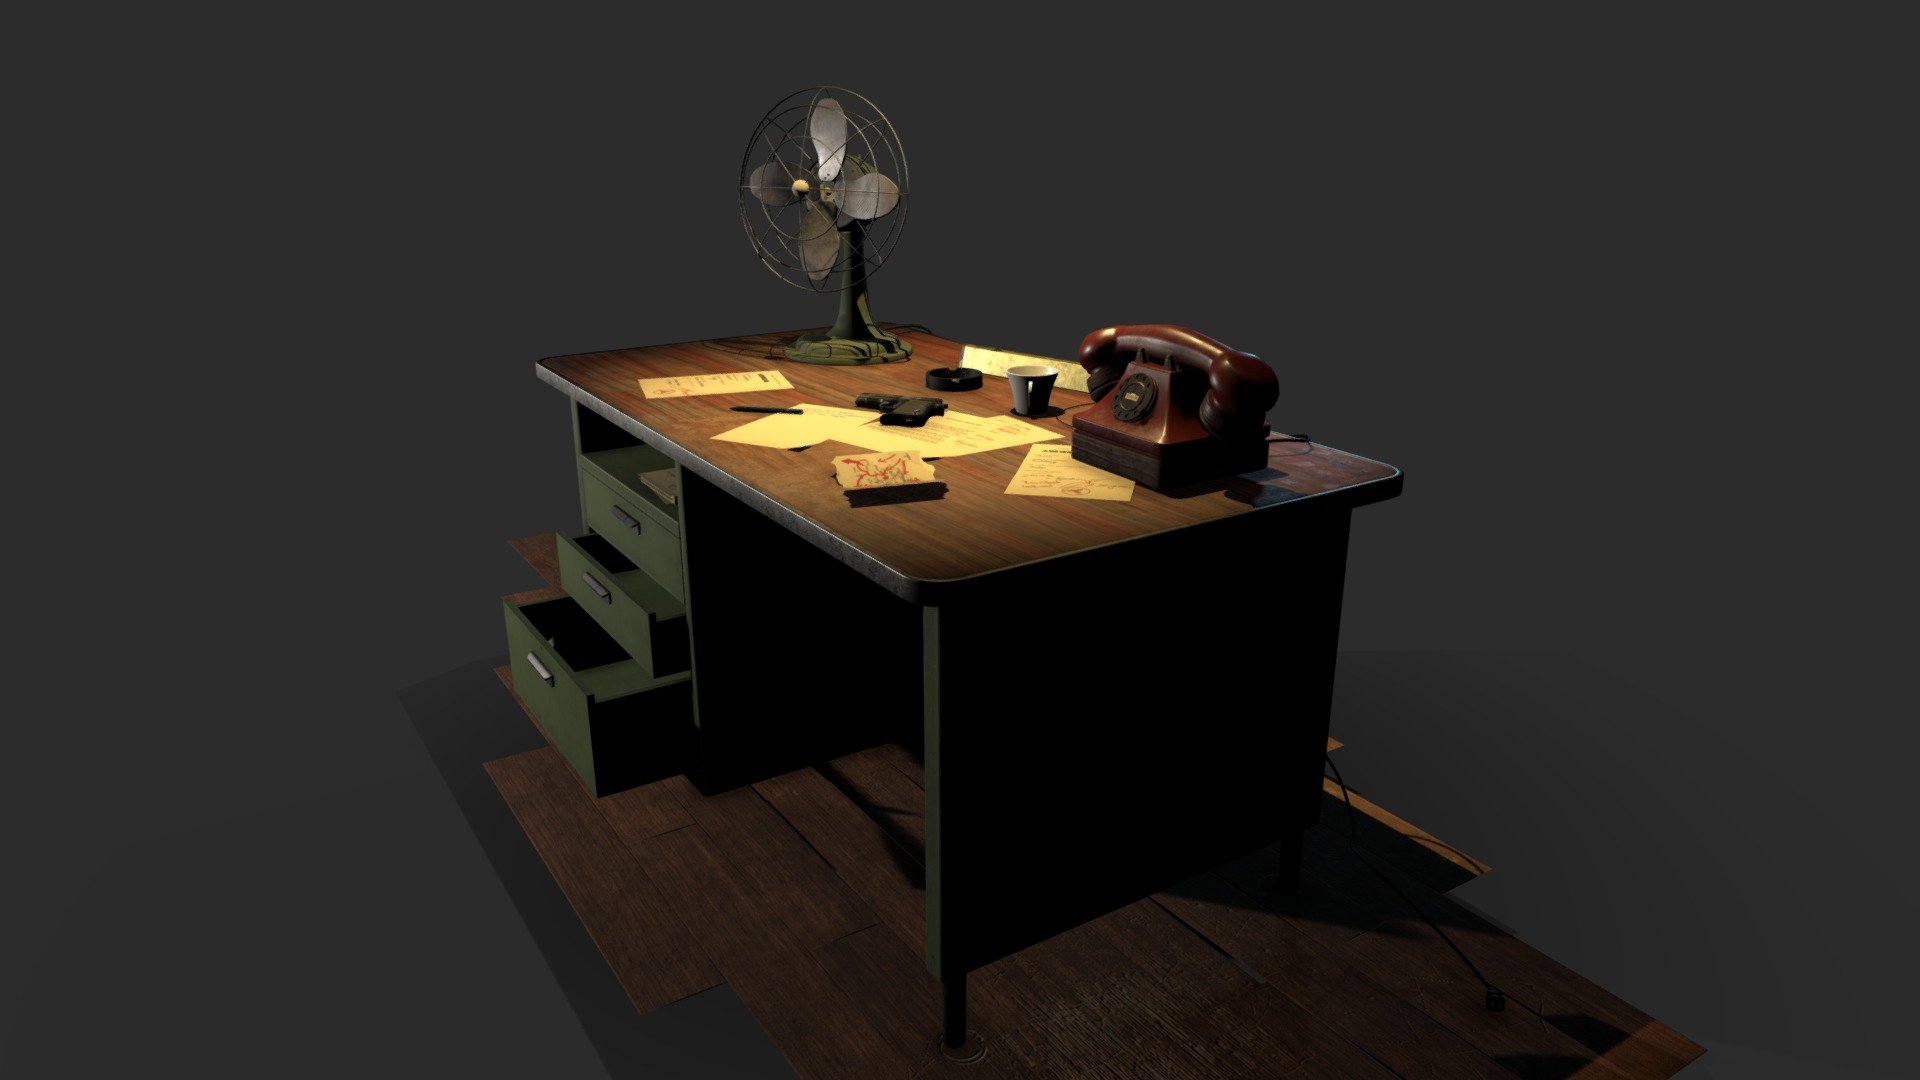 This scene combine 3 assets requested by my School in order to pass my exams

Asset 1 - The Beretta
Asset 2 - The Fan
Asset 3 - The Old Phone

This scene present the Major's office of Alpert Berghem 3d model